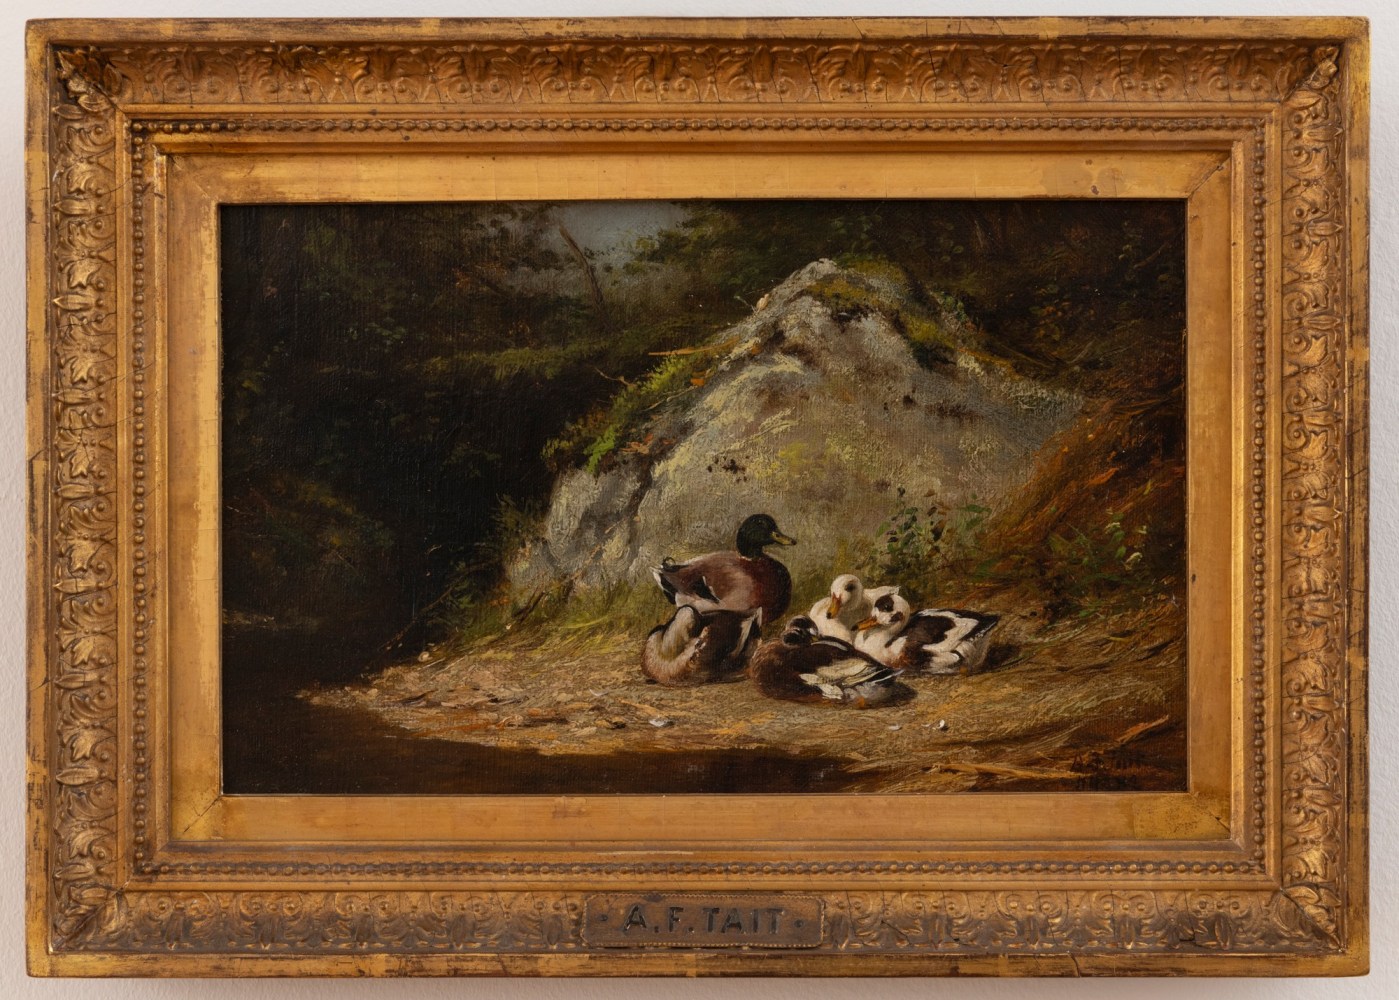 Arthur Fitzwilliam Tait (1819–1905), Ducks Sunning, 1882, oil on canvas, 6 1/2 x 10 1/2 in., signed and dated lower right (framed)